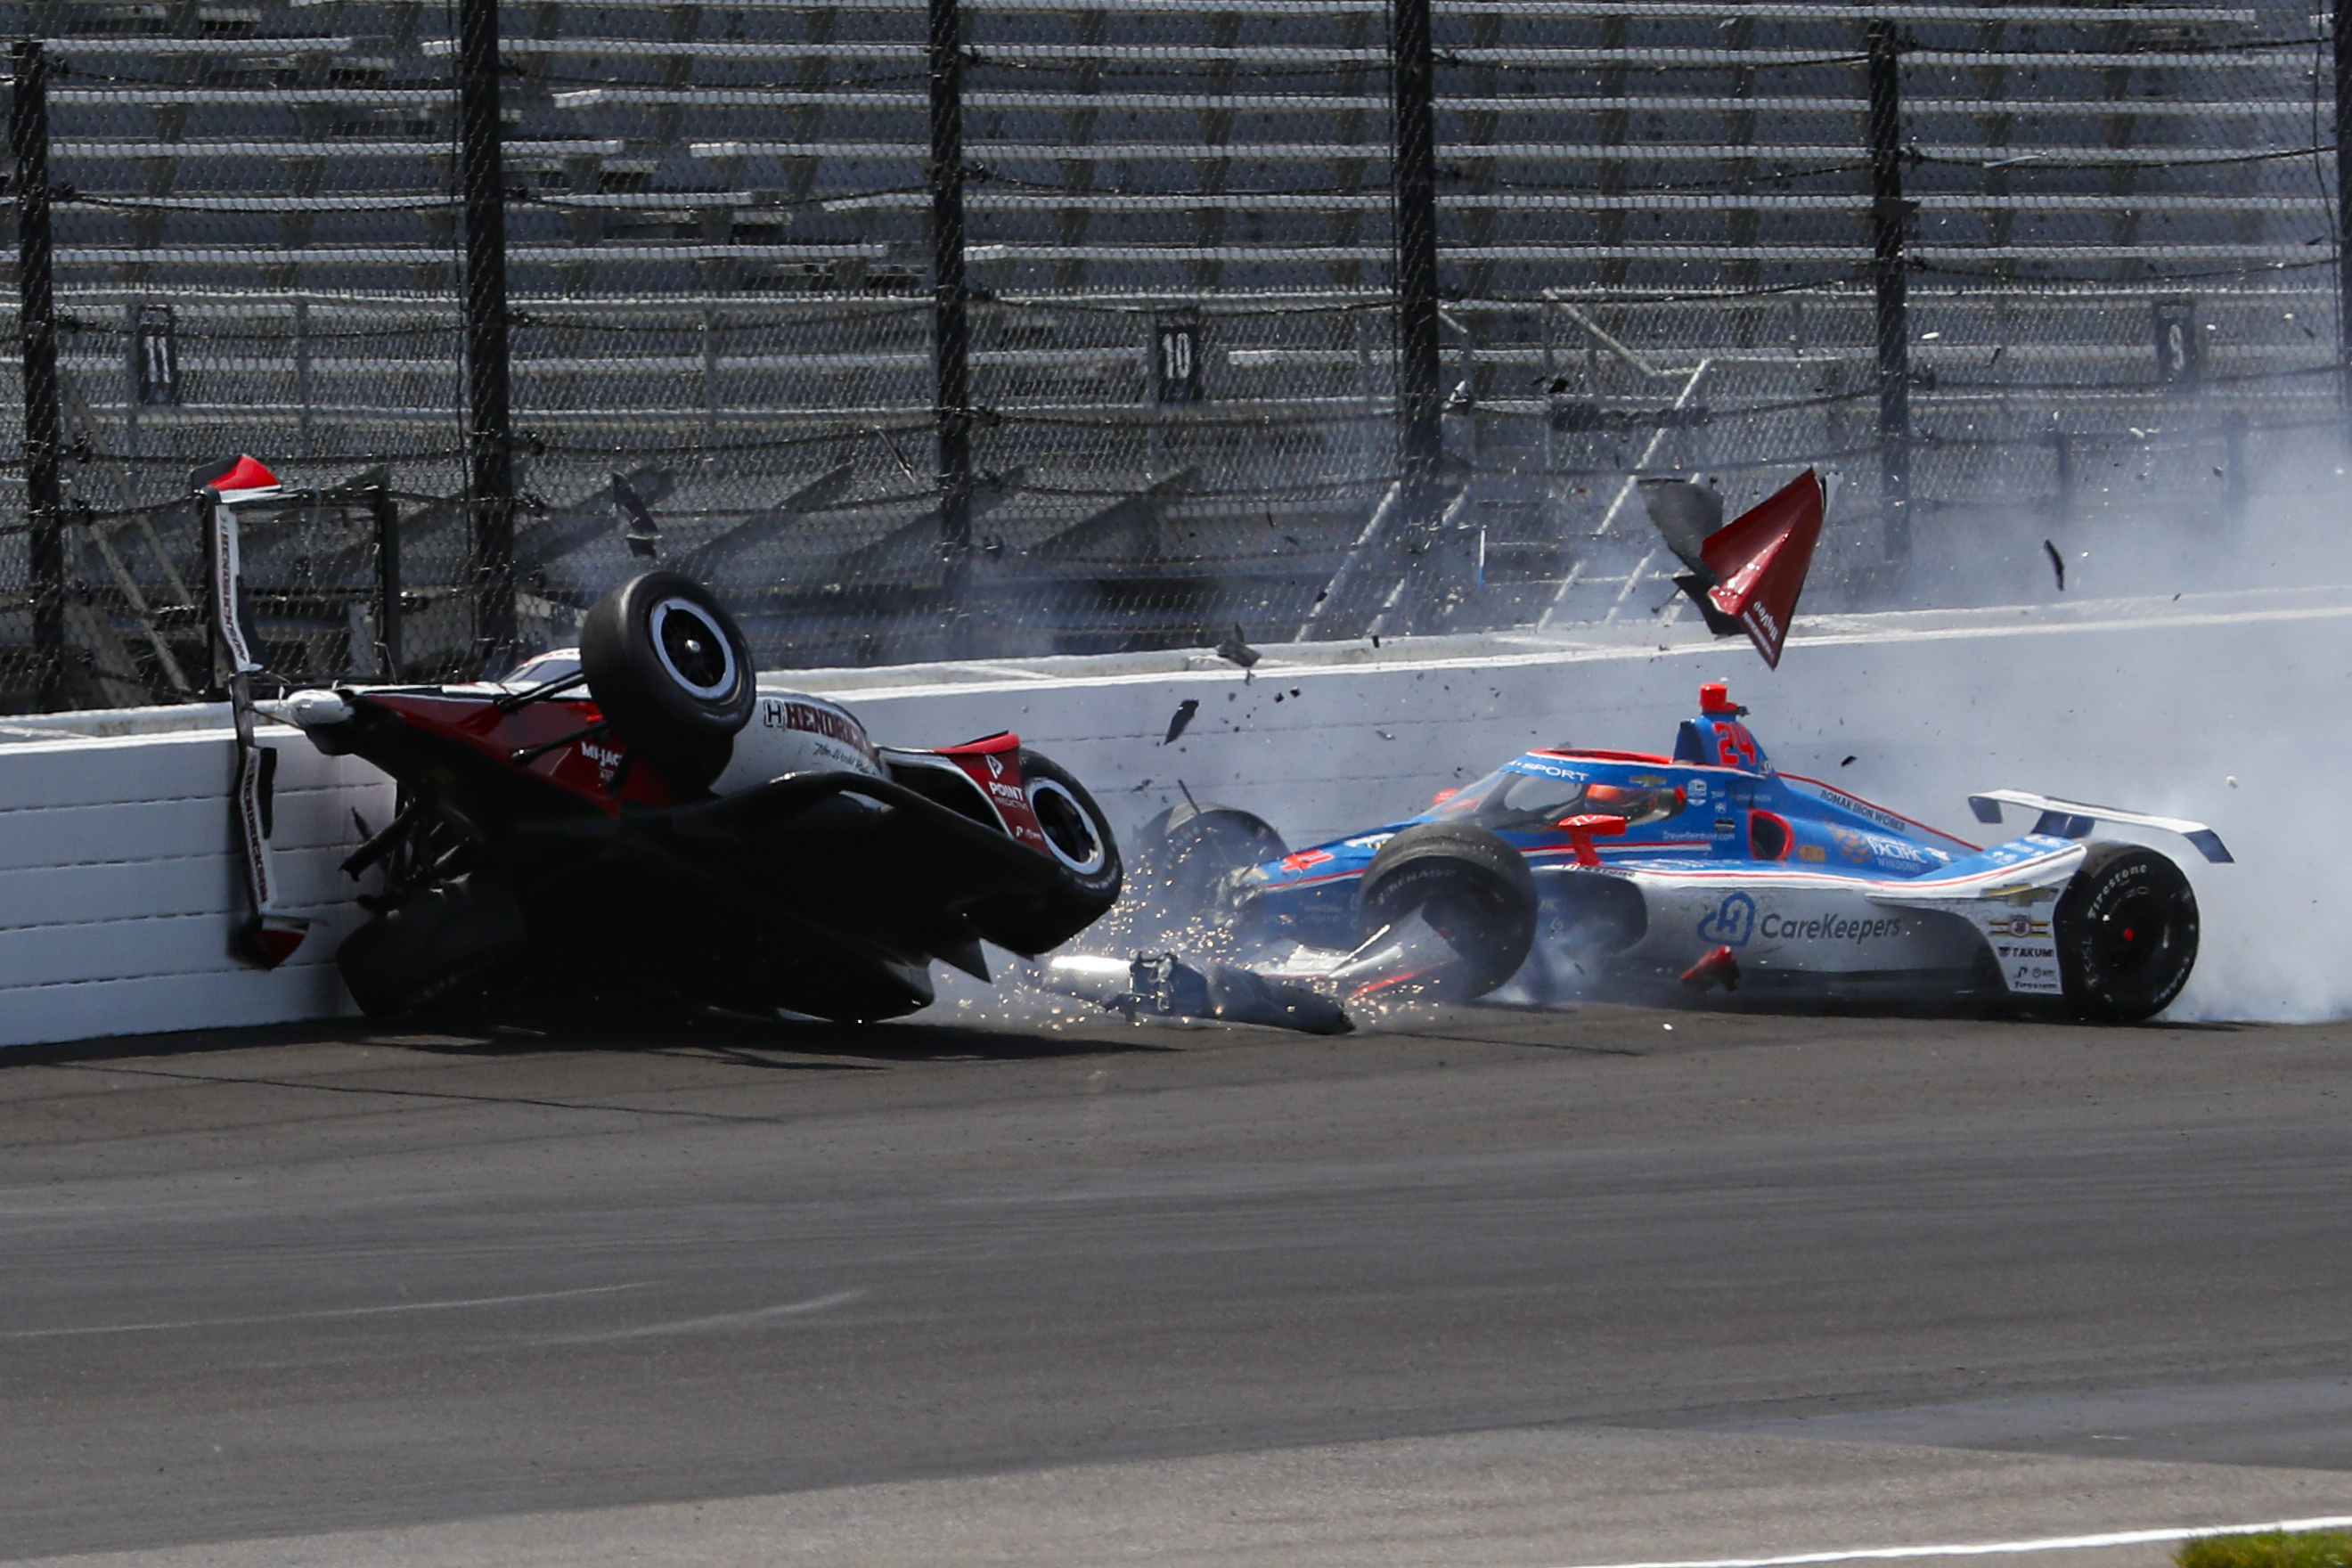 Katherine Legge (left) and Stefan Wilson crash in turn one at the Indianapolis 500 during practice.